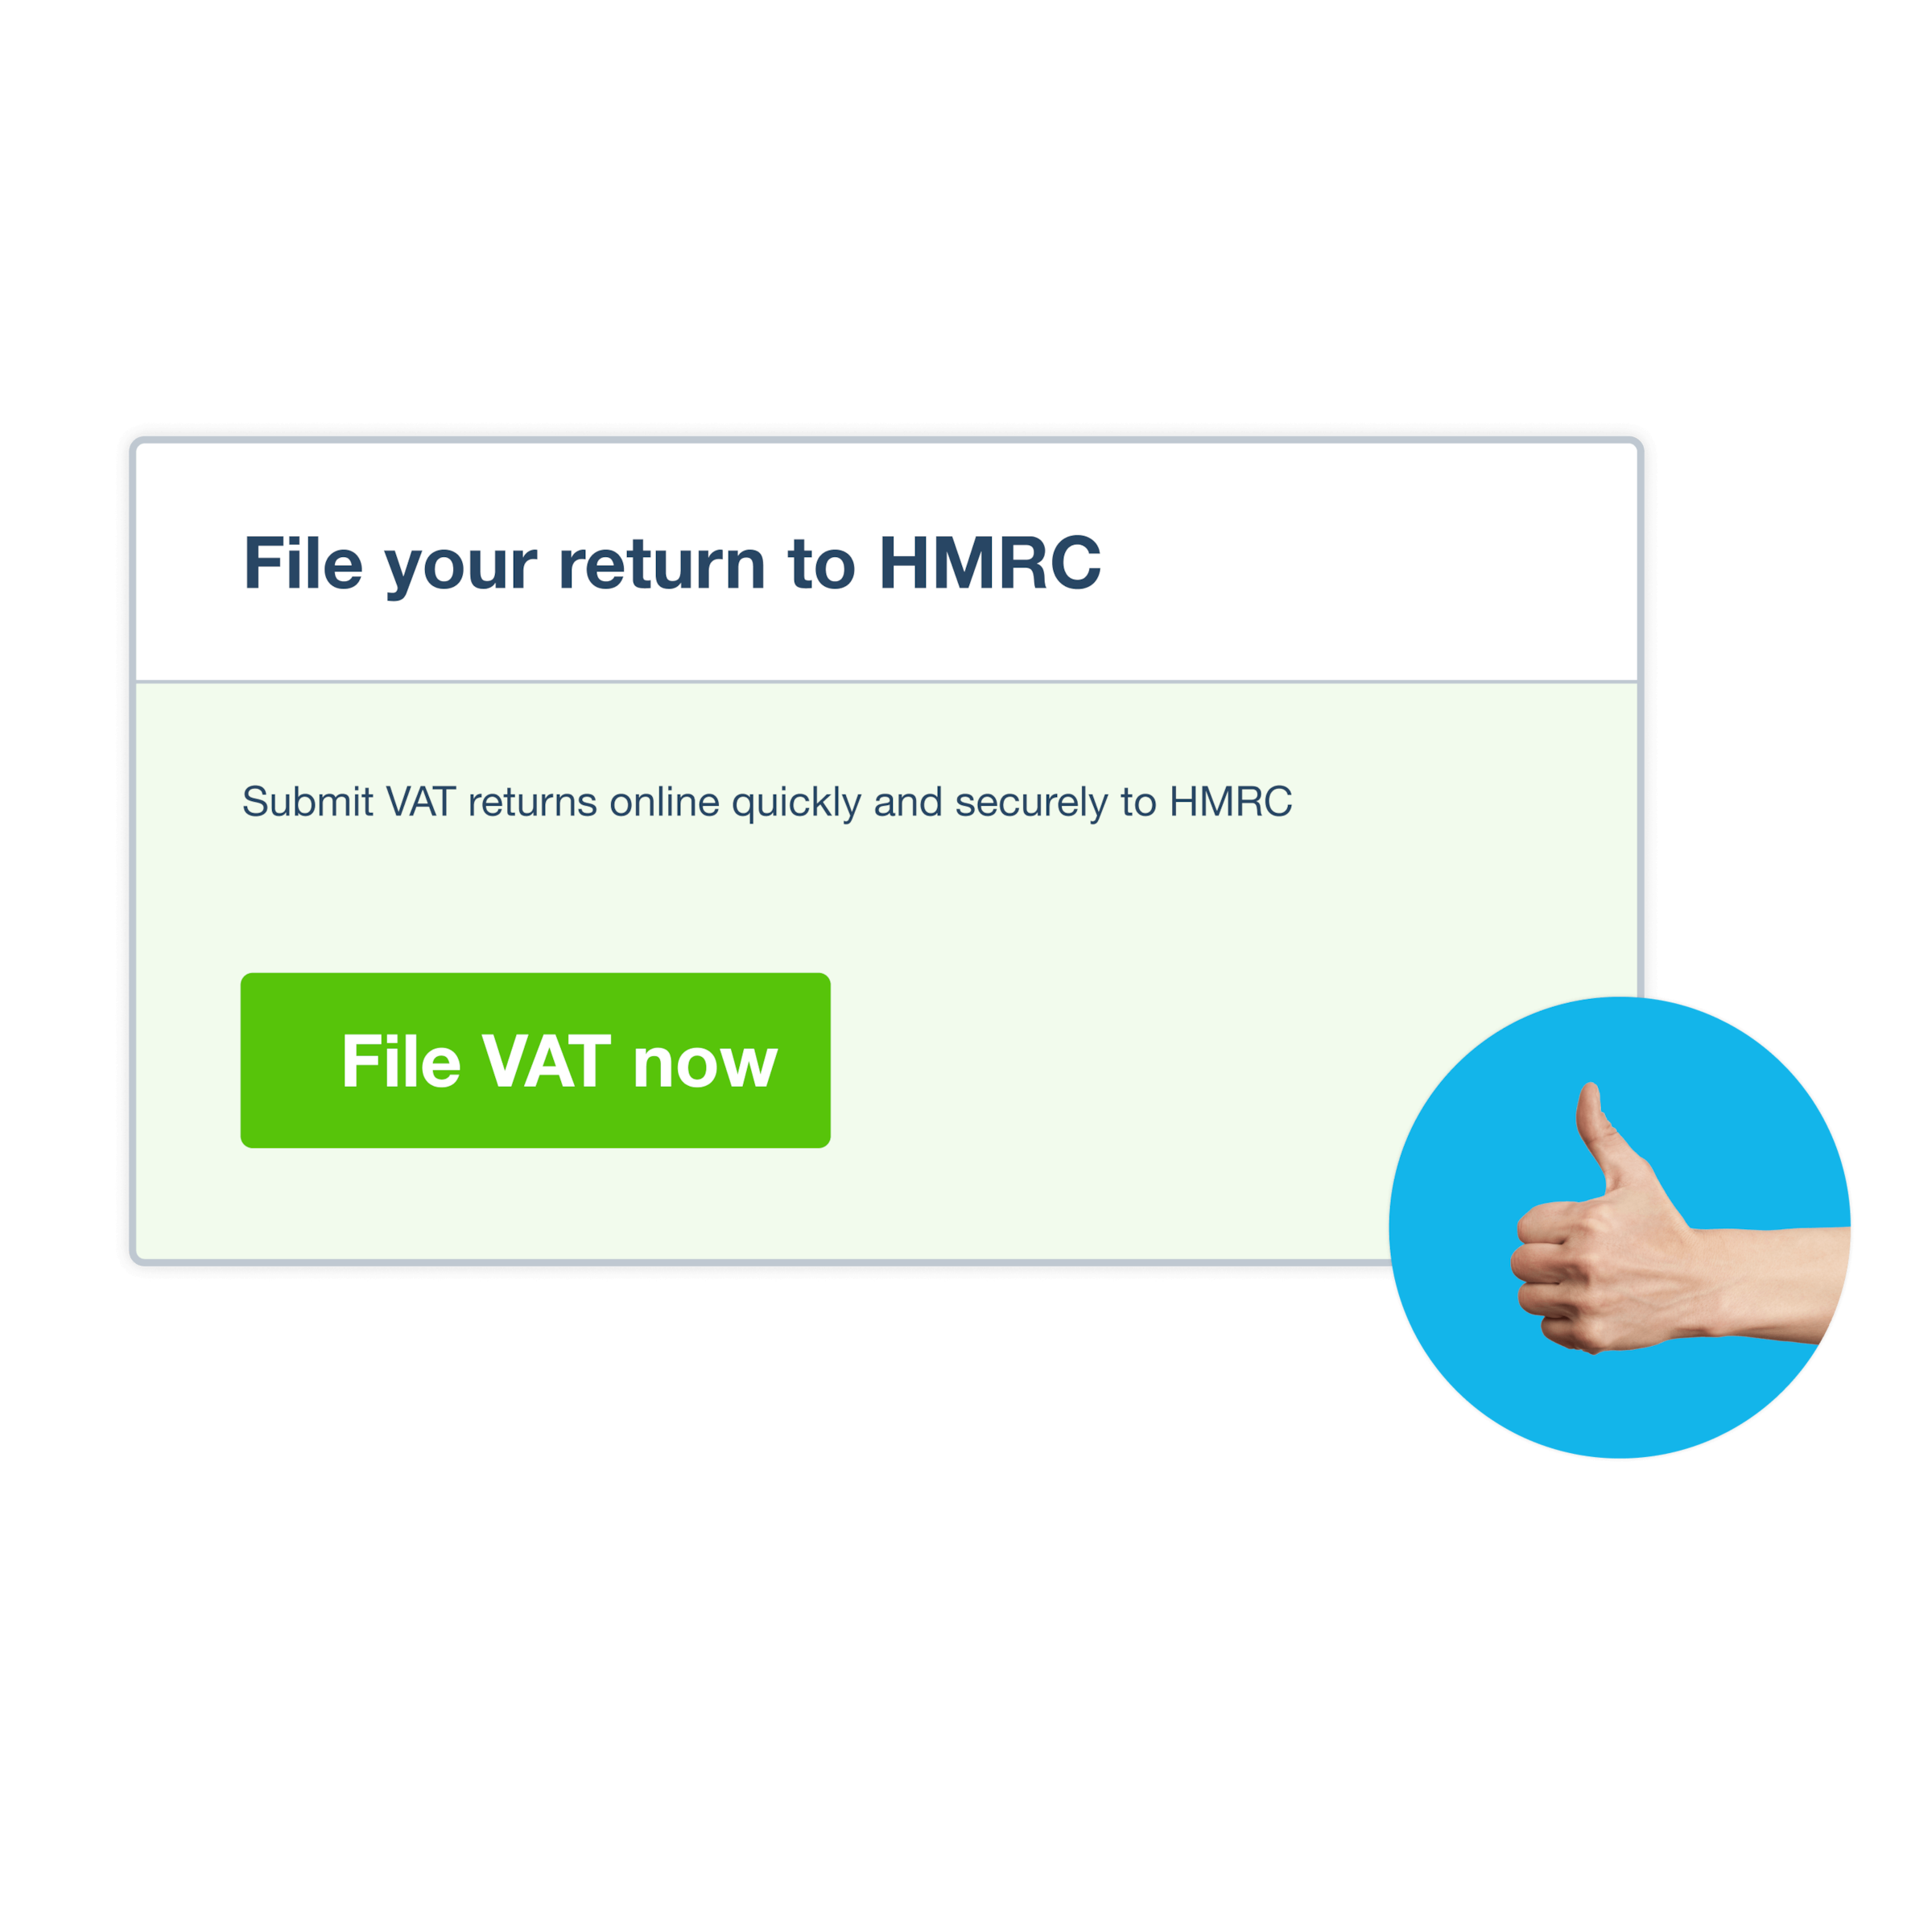 A screen displays a button for filing VAT returns with HMRC directly.